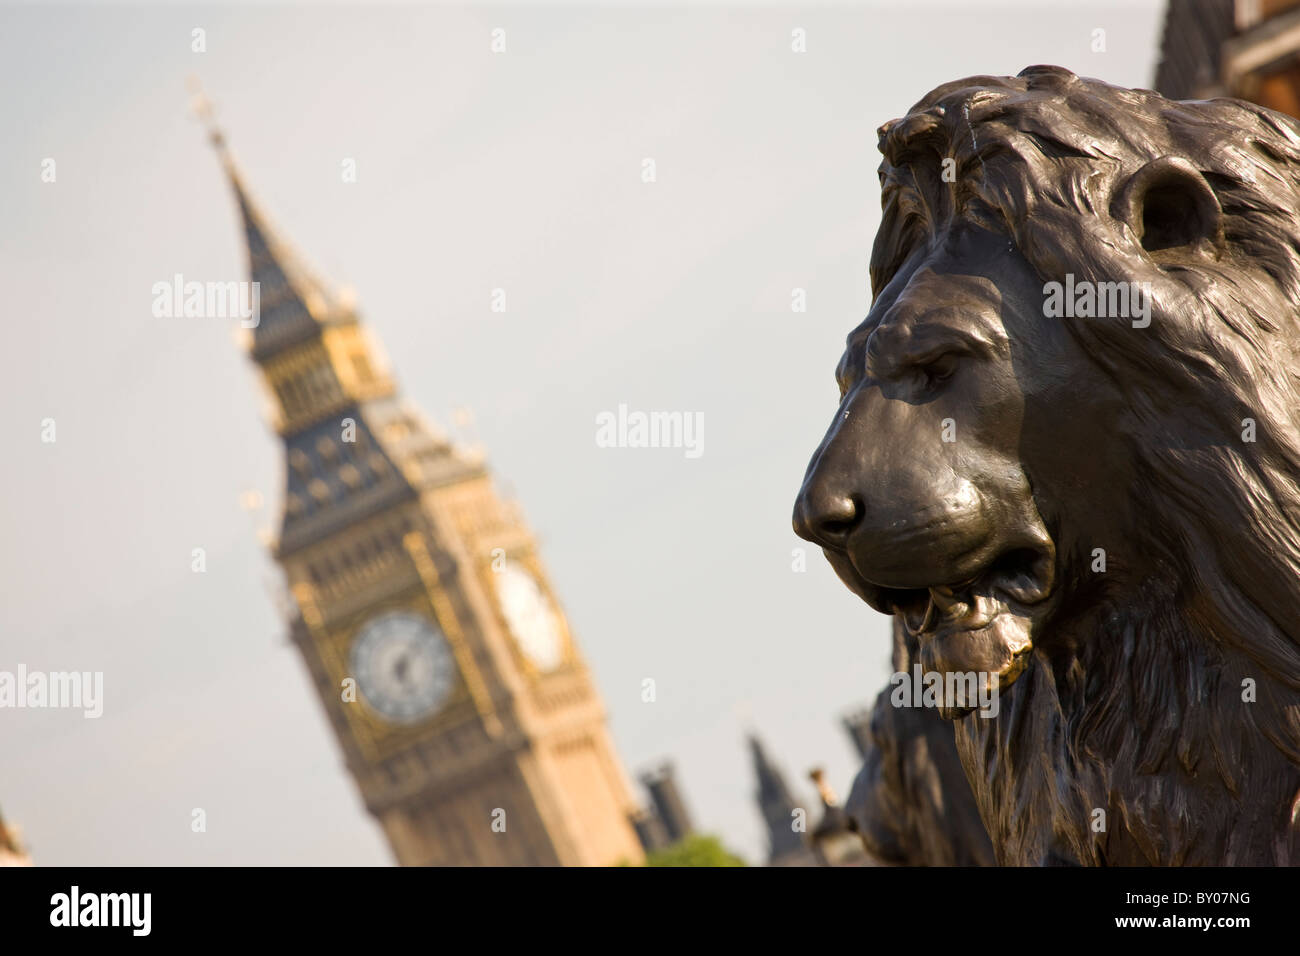 Big Ben with Trafalgar Square Lions in foreground Stock Photo